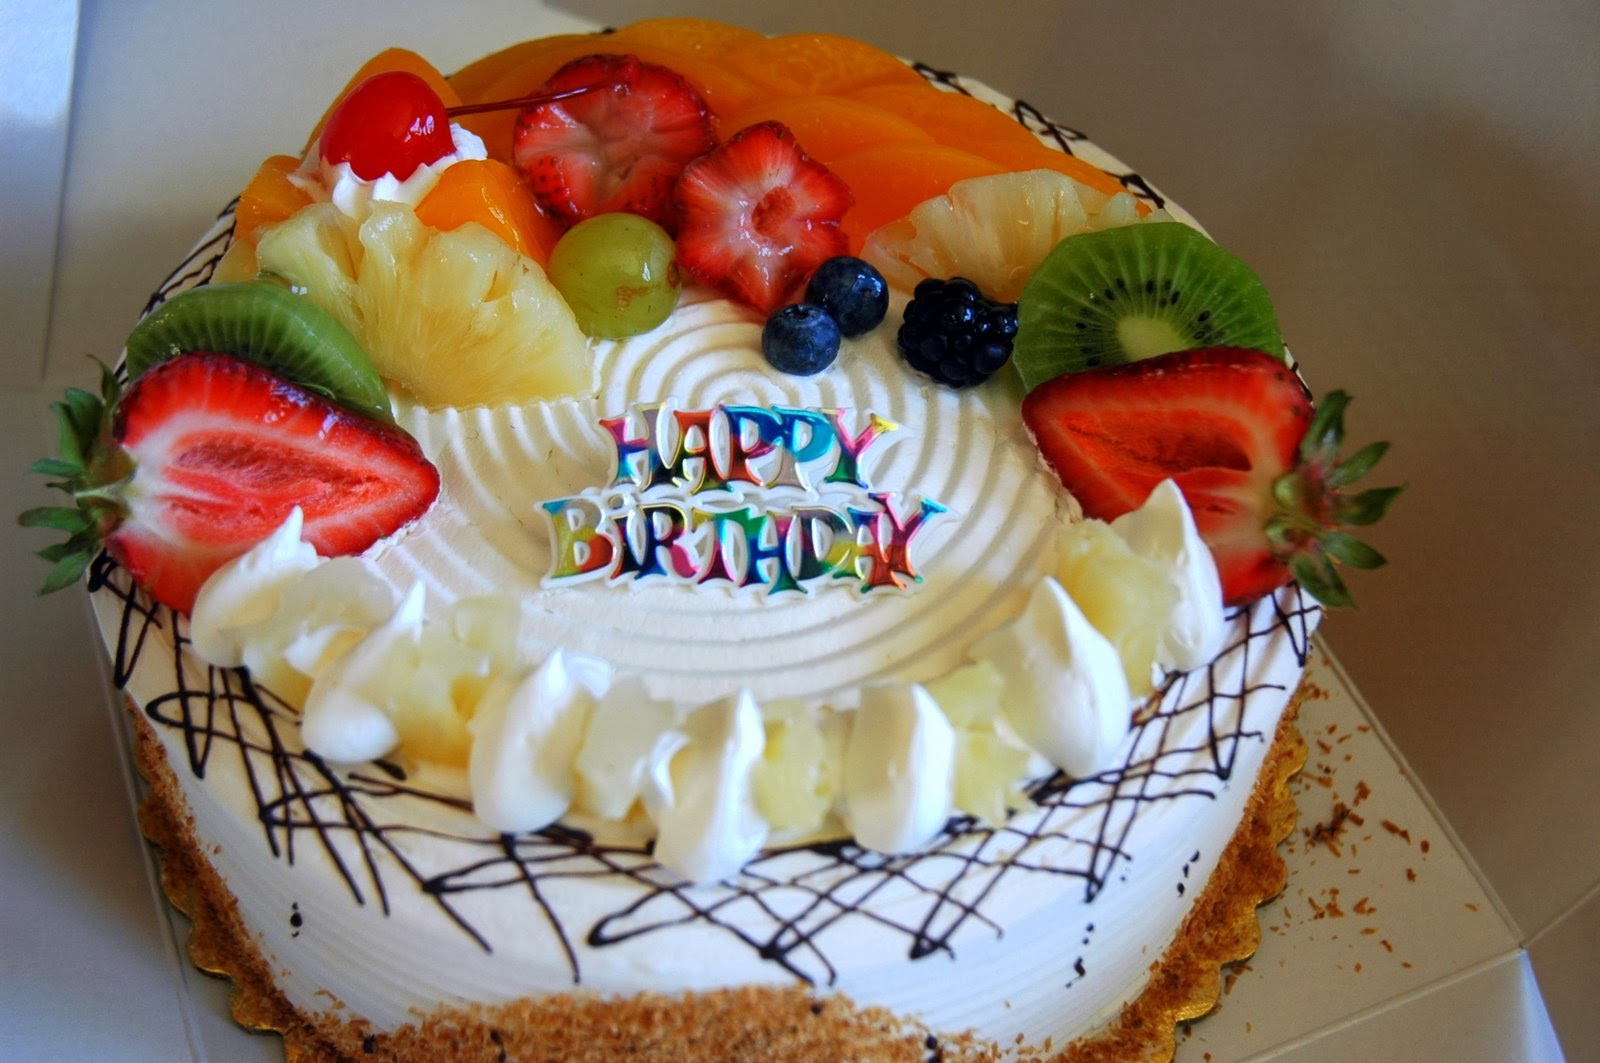 Free Pictures Of Birthday Cakes
 Lovable Happy Birthday Greetings free